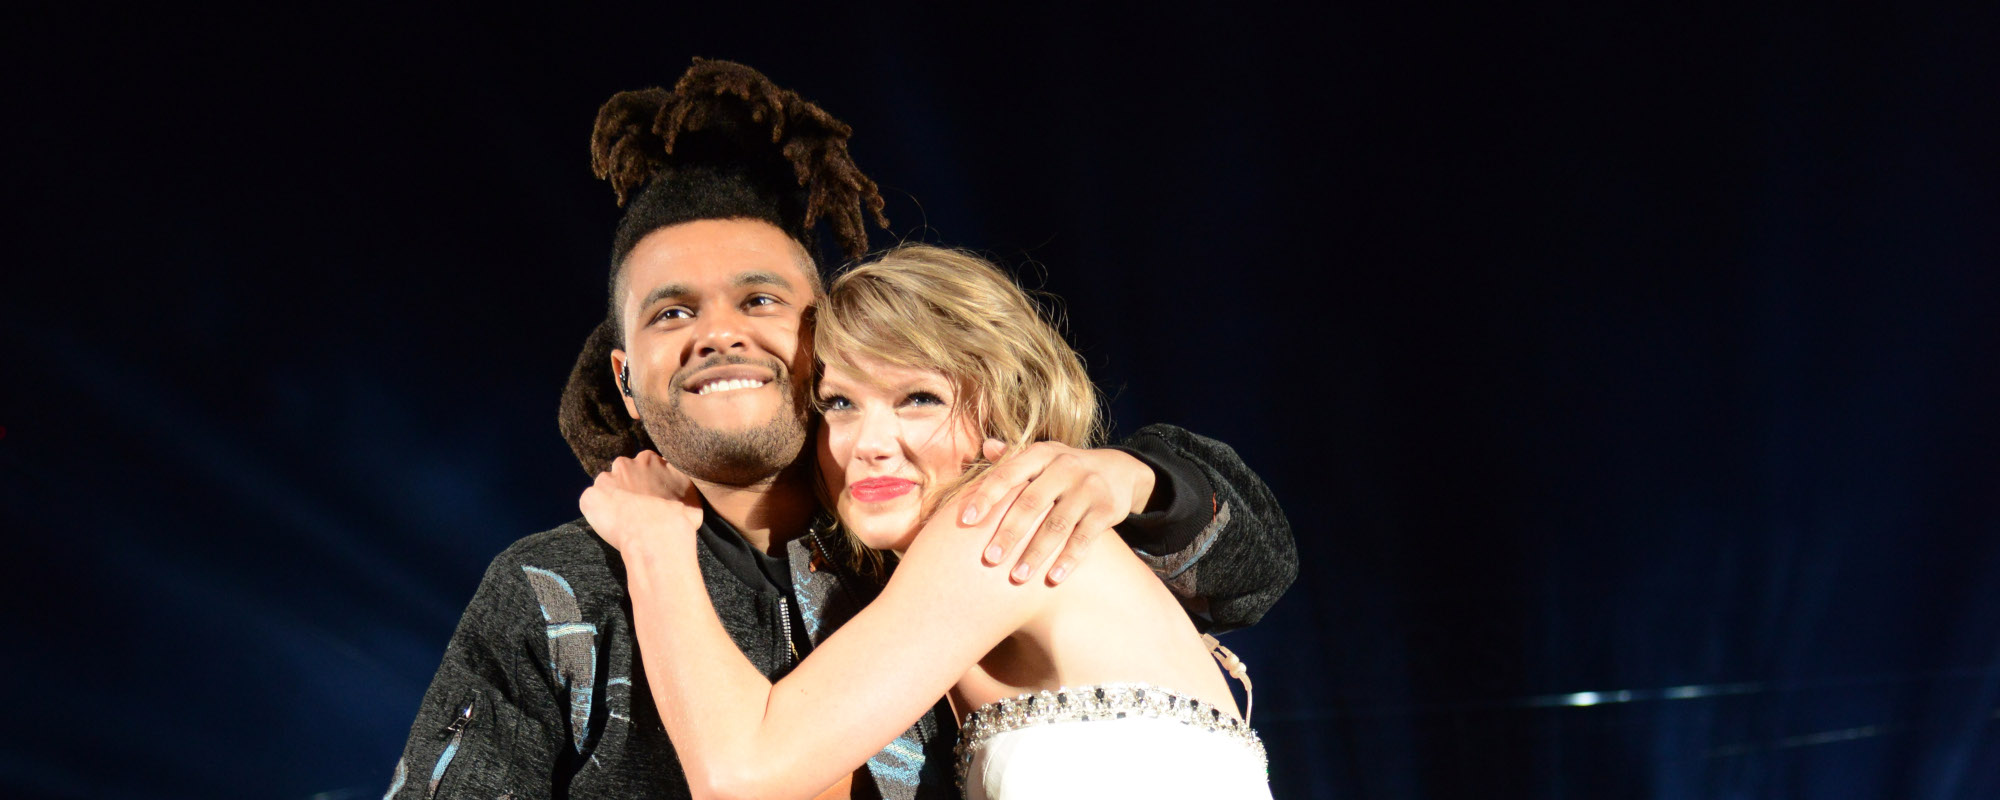 The Weeknd Celebrates Taylor Swift Earning 100 Million Monthly Spotify Listeners